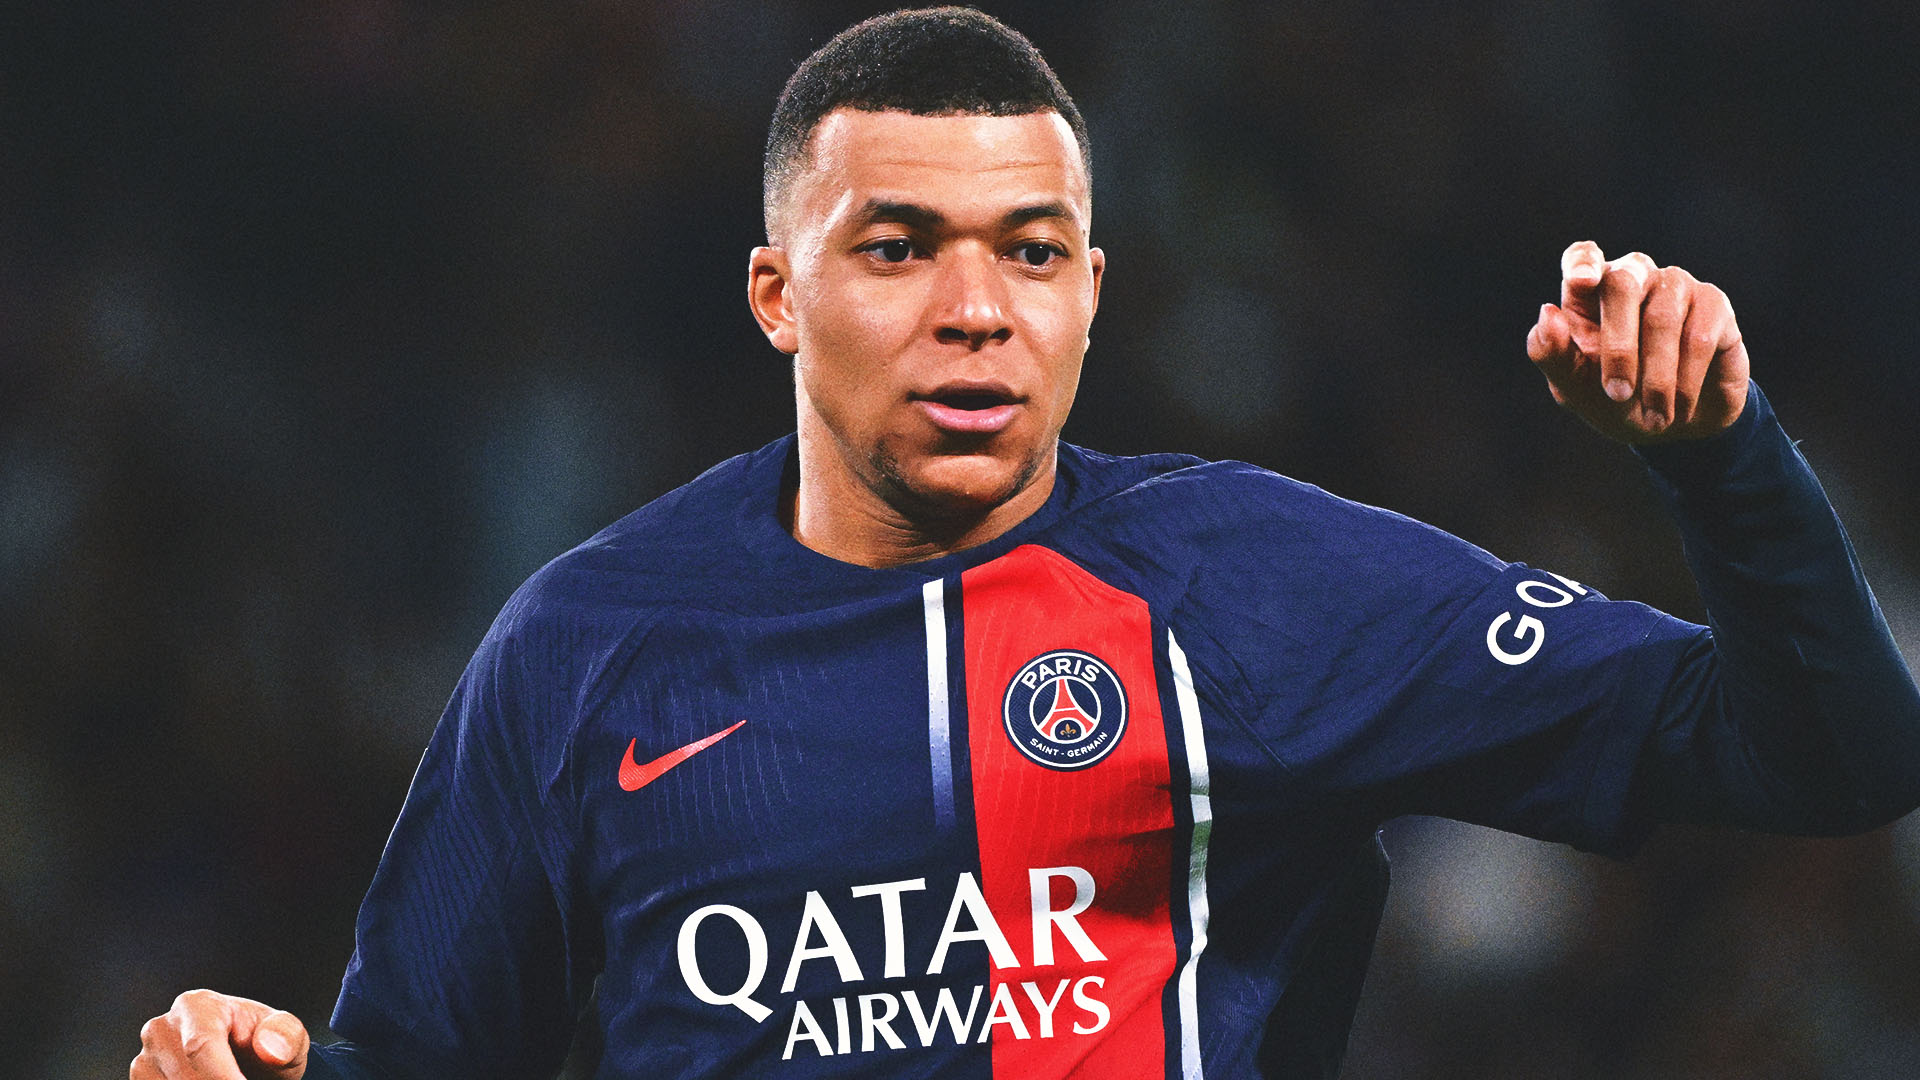 Mbappe returns for PSG as substitute against Toulouse